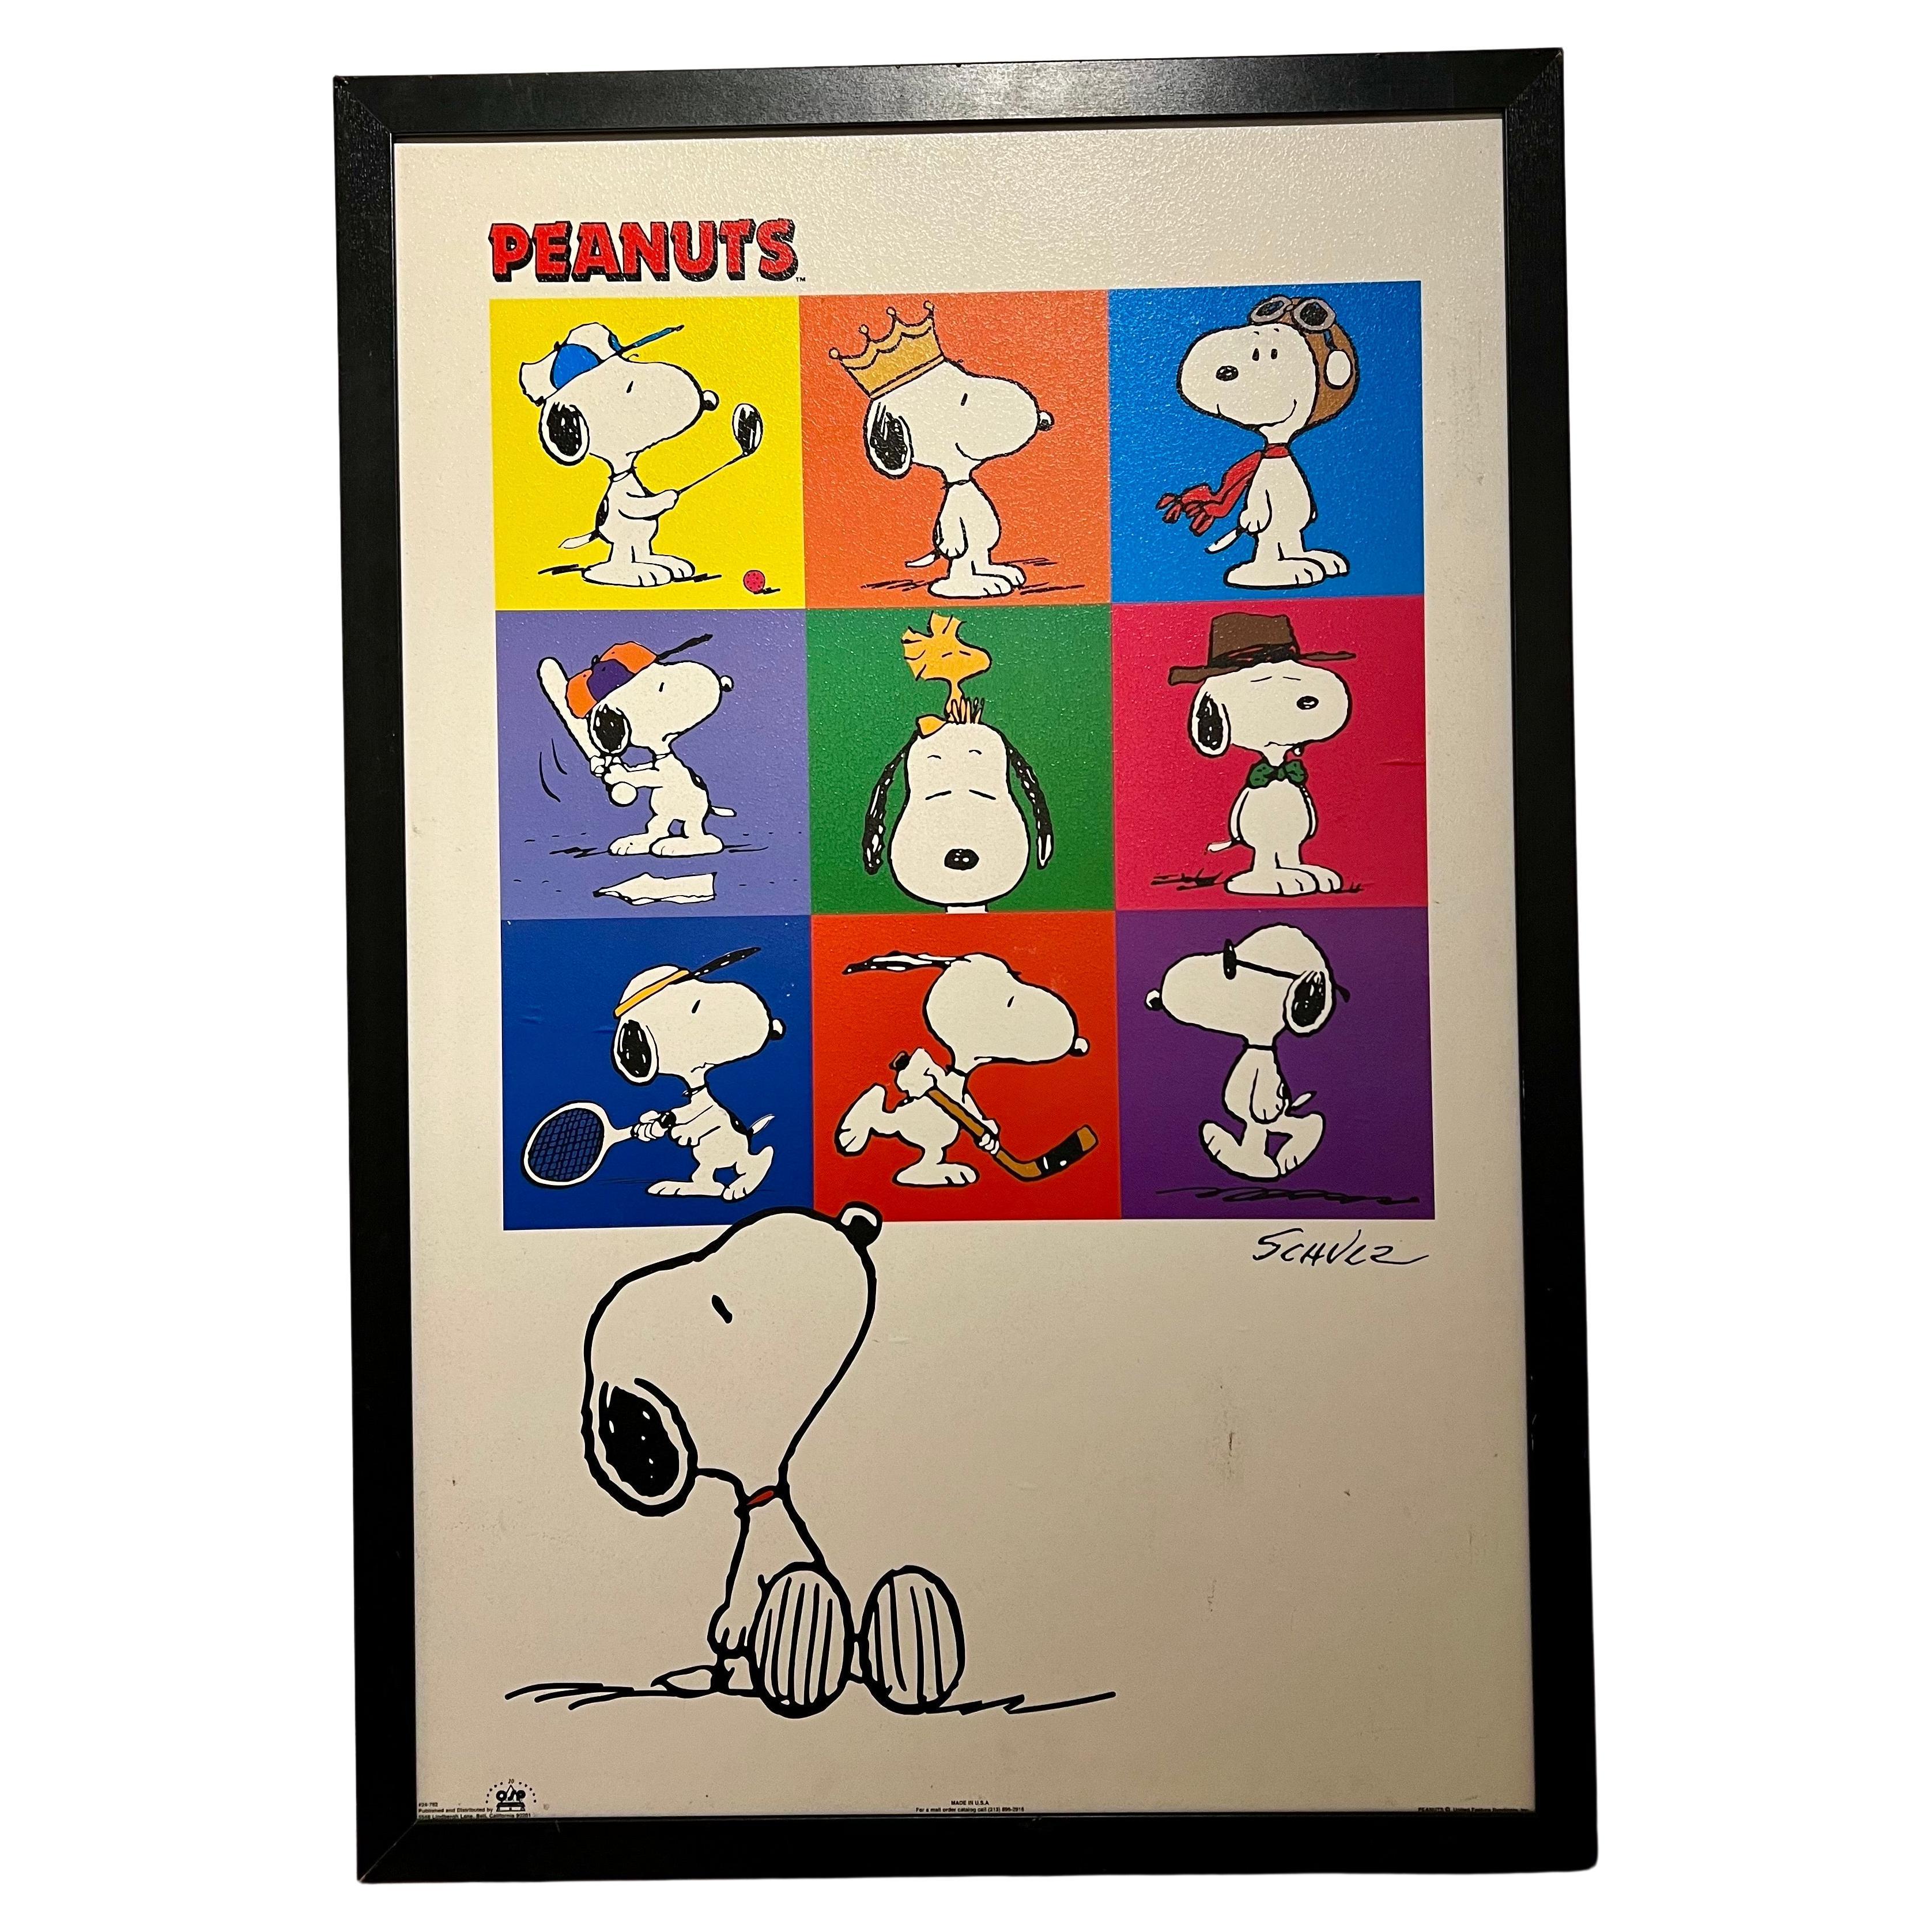 OSP Publishing Peanuts by Charles M. Schulz Snoopy Sports Poster, circa 1970's very collectible textured finish frame shows some wear due to age overall very clean.